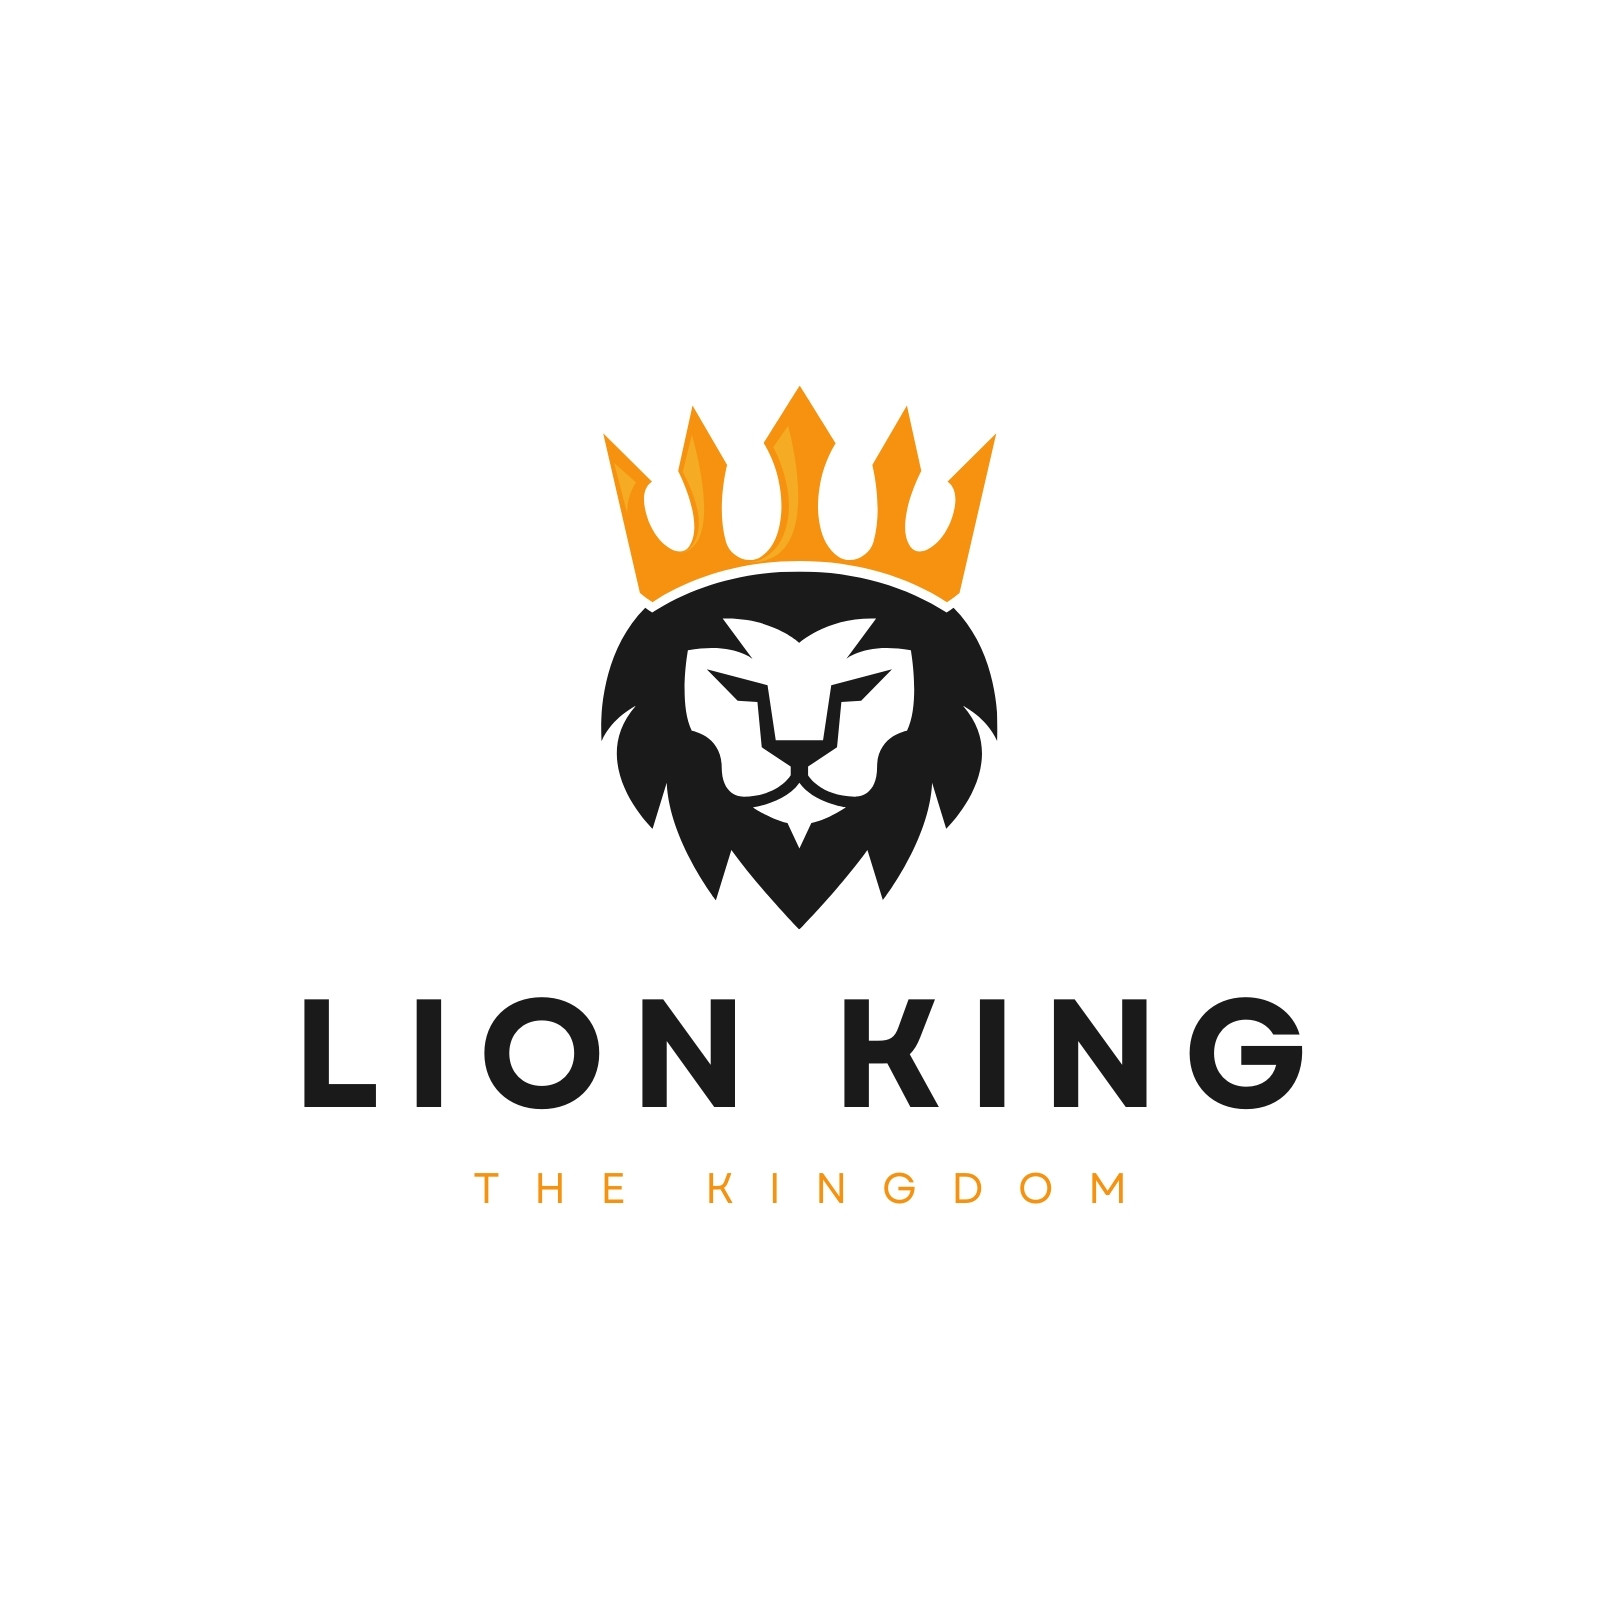 13 Gold Lion Head Logo Stock Video Footage - 4K and HD Video Clips |  Shutterstock